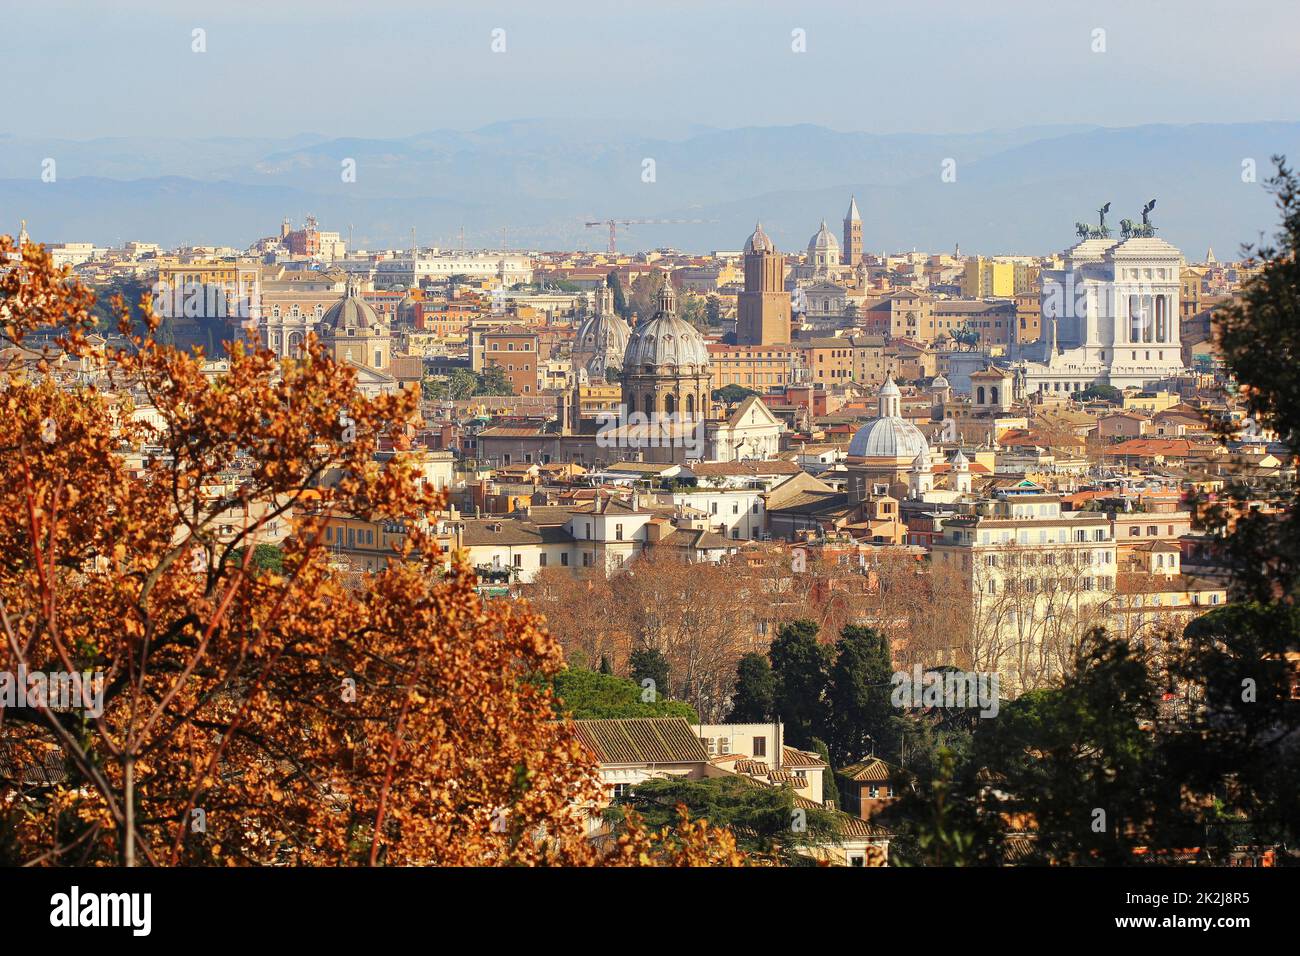 Rome (Italy) - The view of the city from Janiculum hill and terrace, with Vittoriano, TrinitÃ  dei Monti church and Quirinale palace. Stock Photo